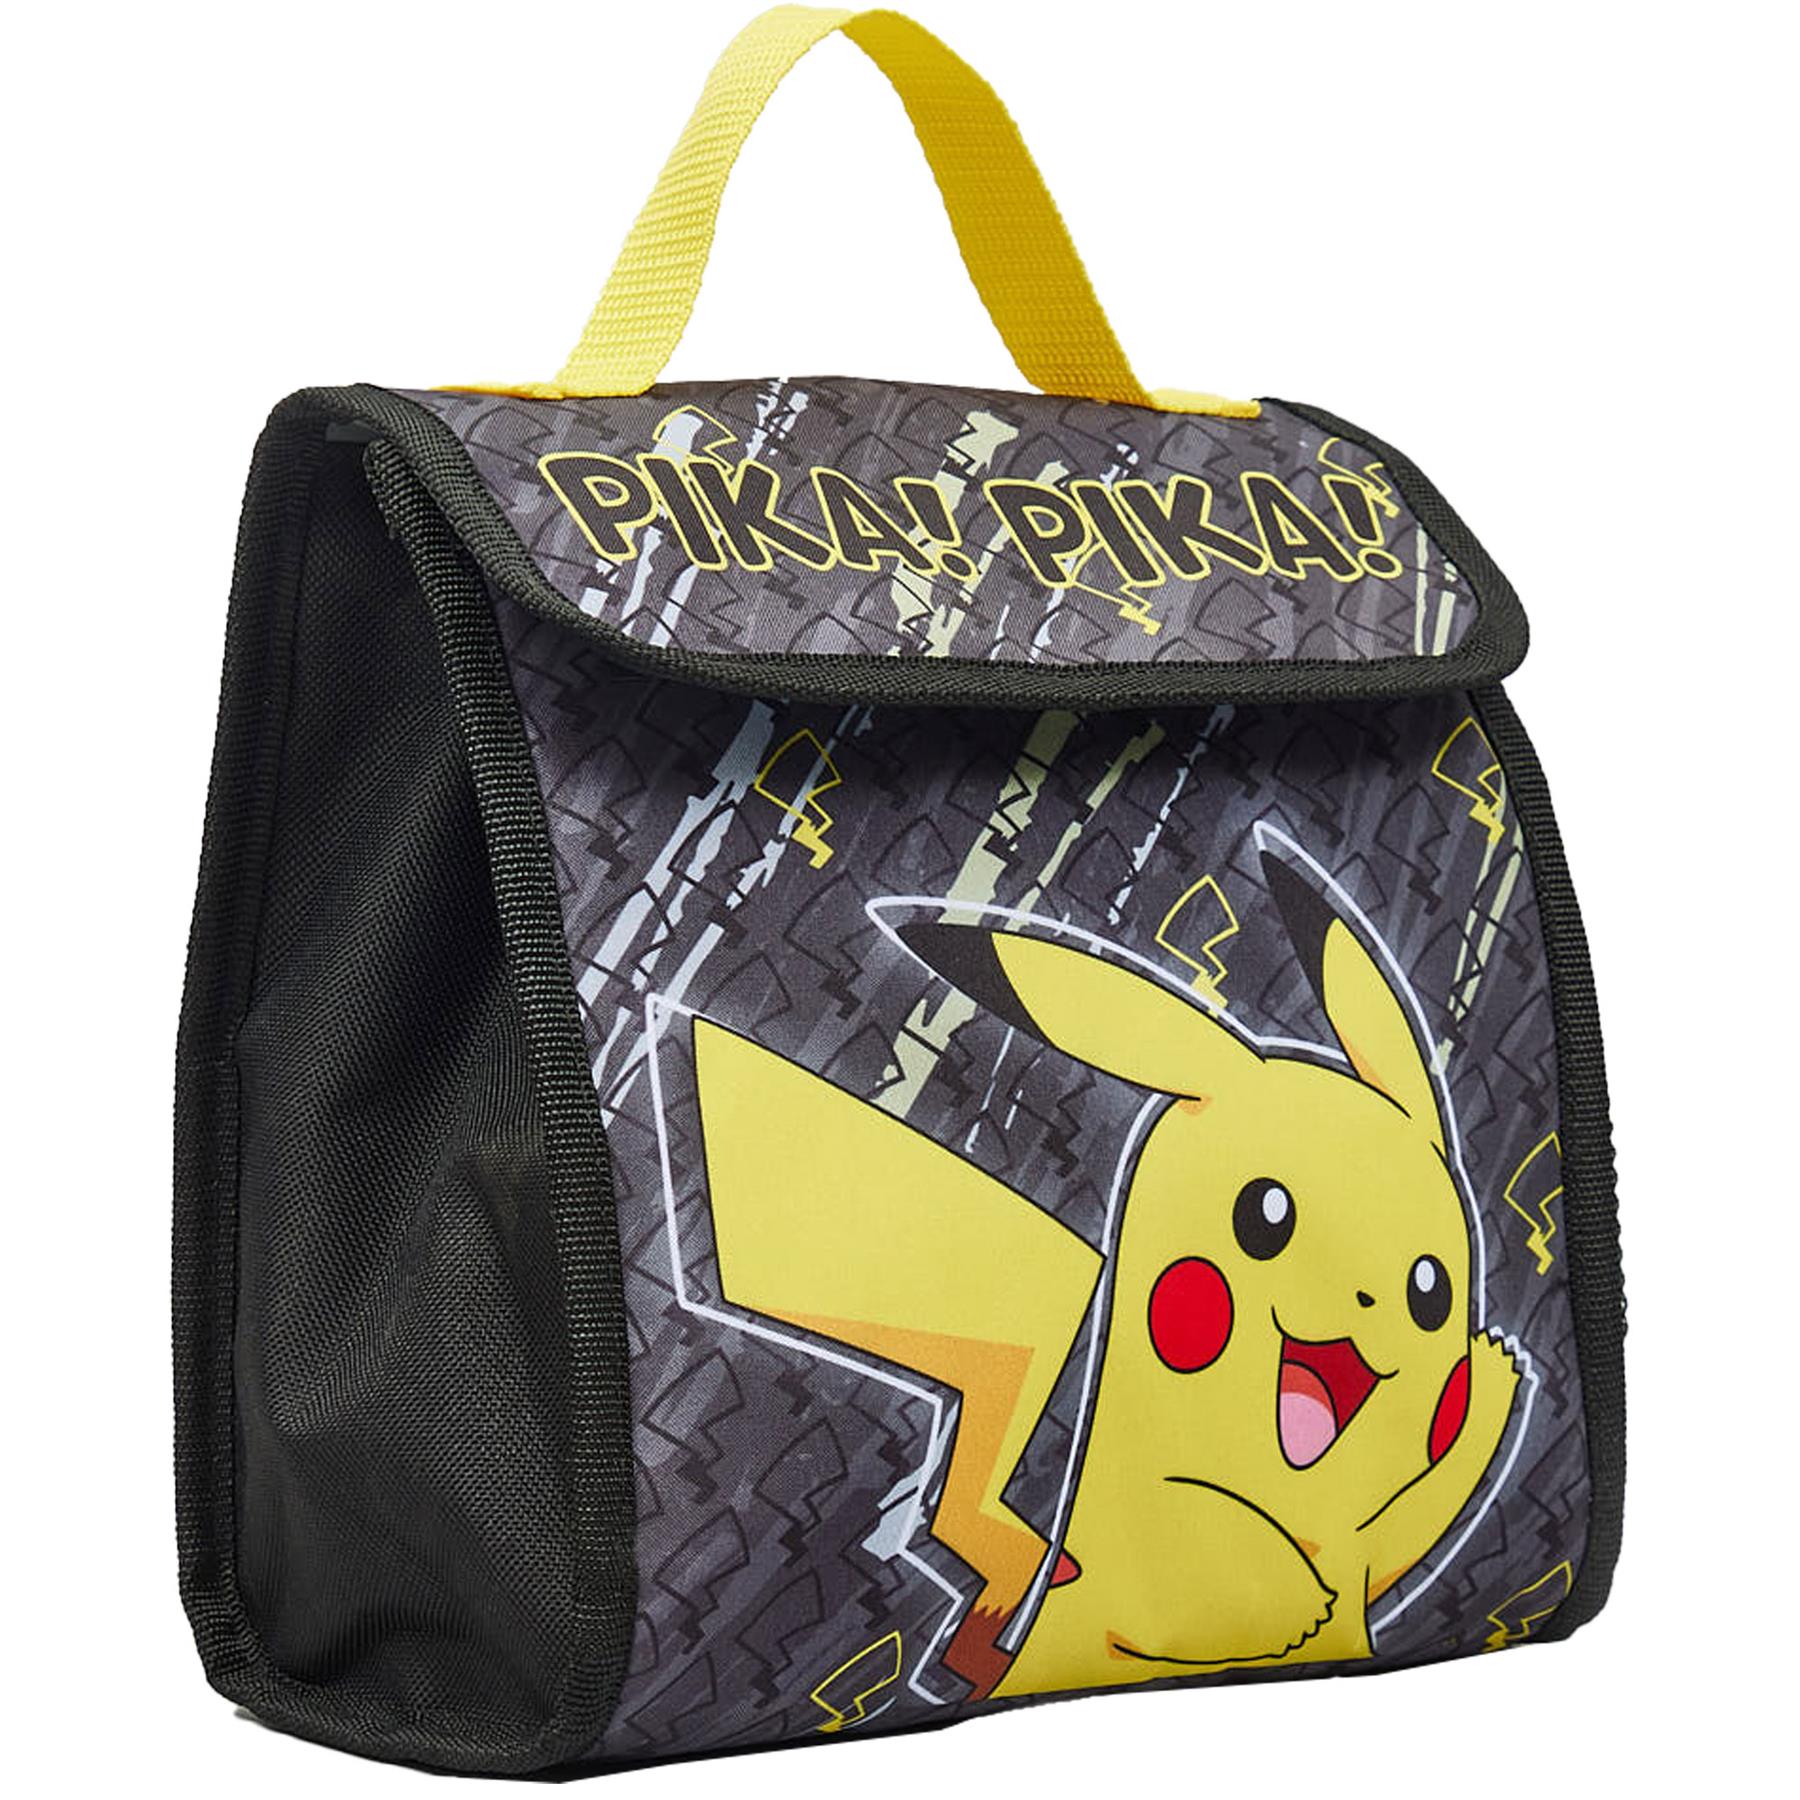 Kids Officially Licensed Pokemon Pikachu Lunch Bag With Side Mesh Pocket